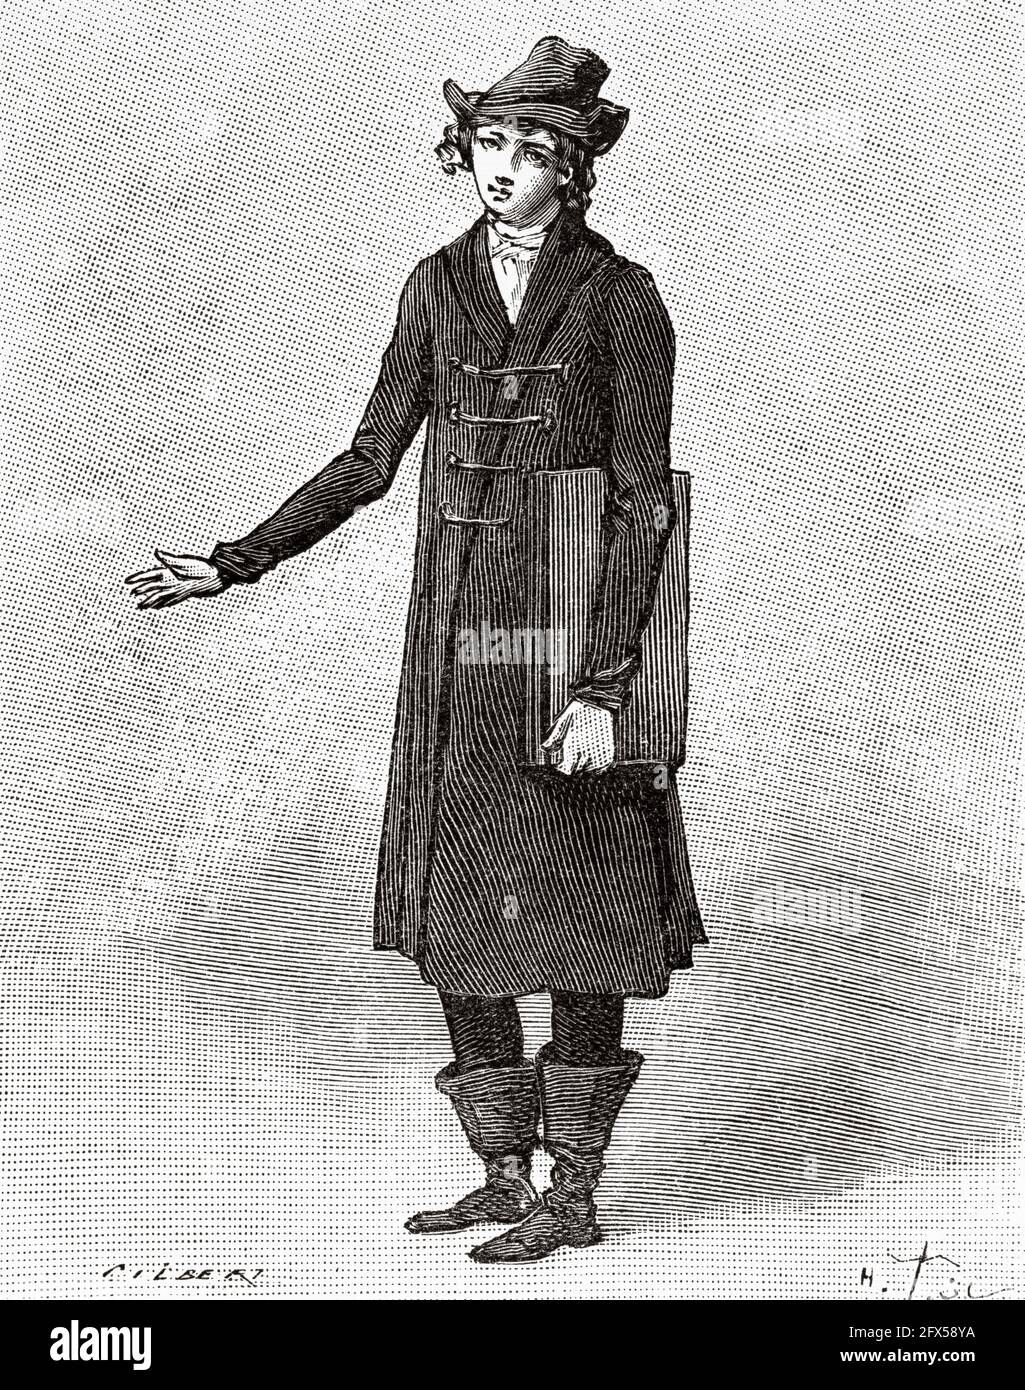 Costume given to the Polytechnic School by ministerial decree of August 1, 1798. France, Europe. Old 19th century engraved illustration from La Nature 1893 Stock Photo